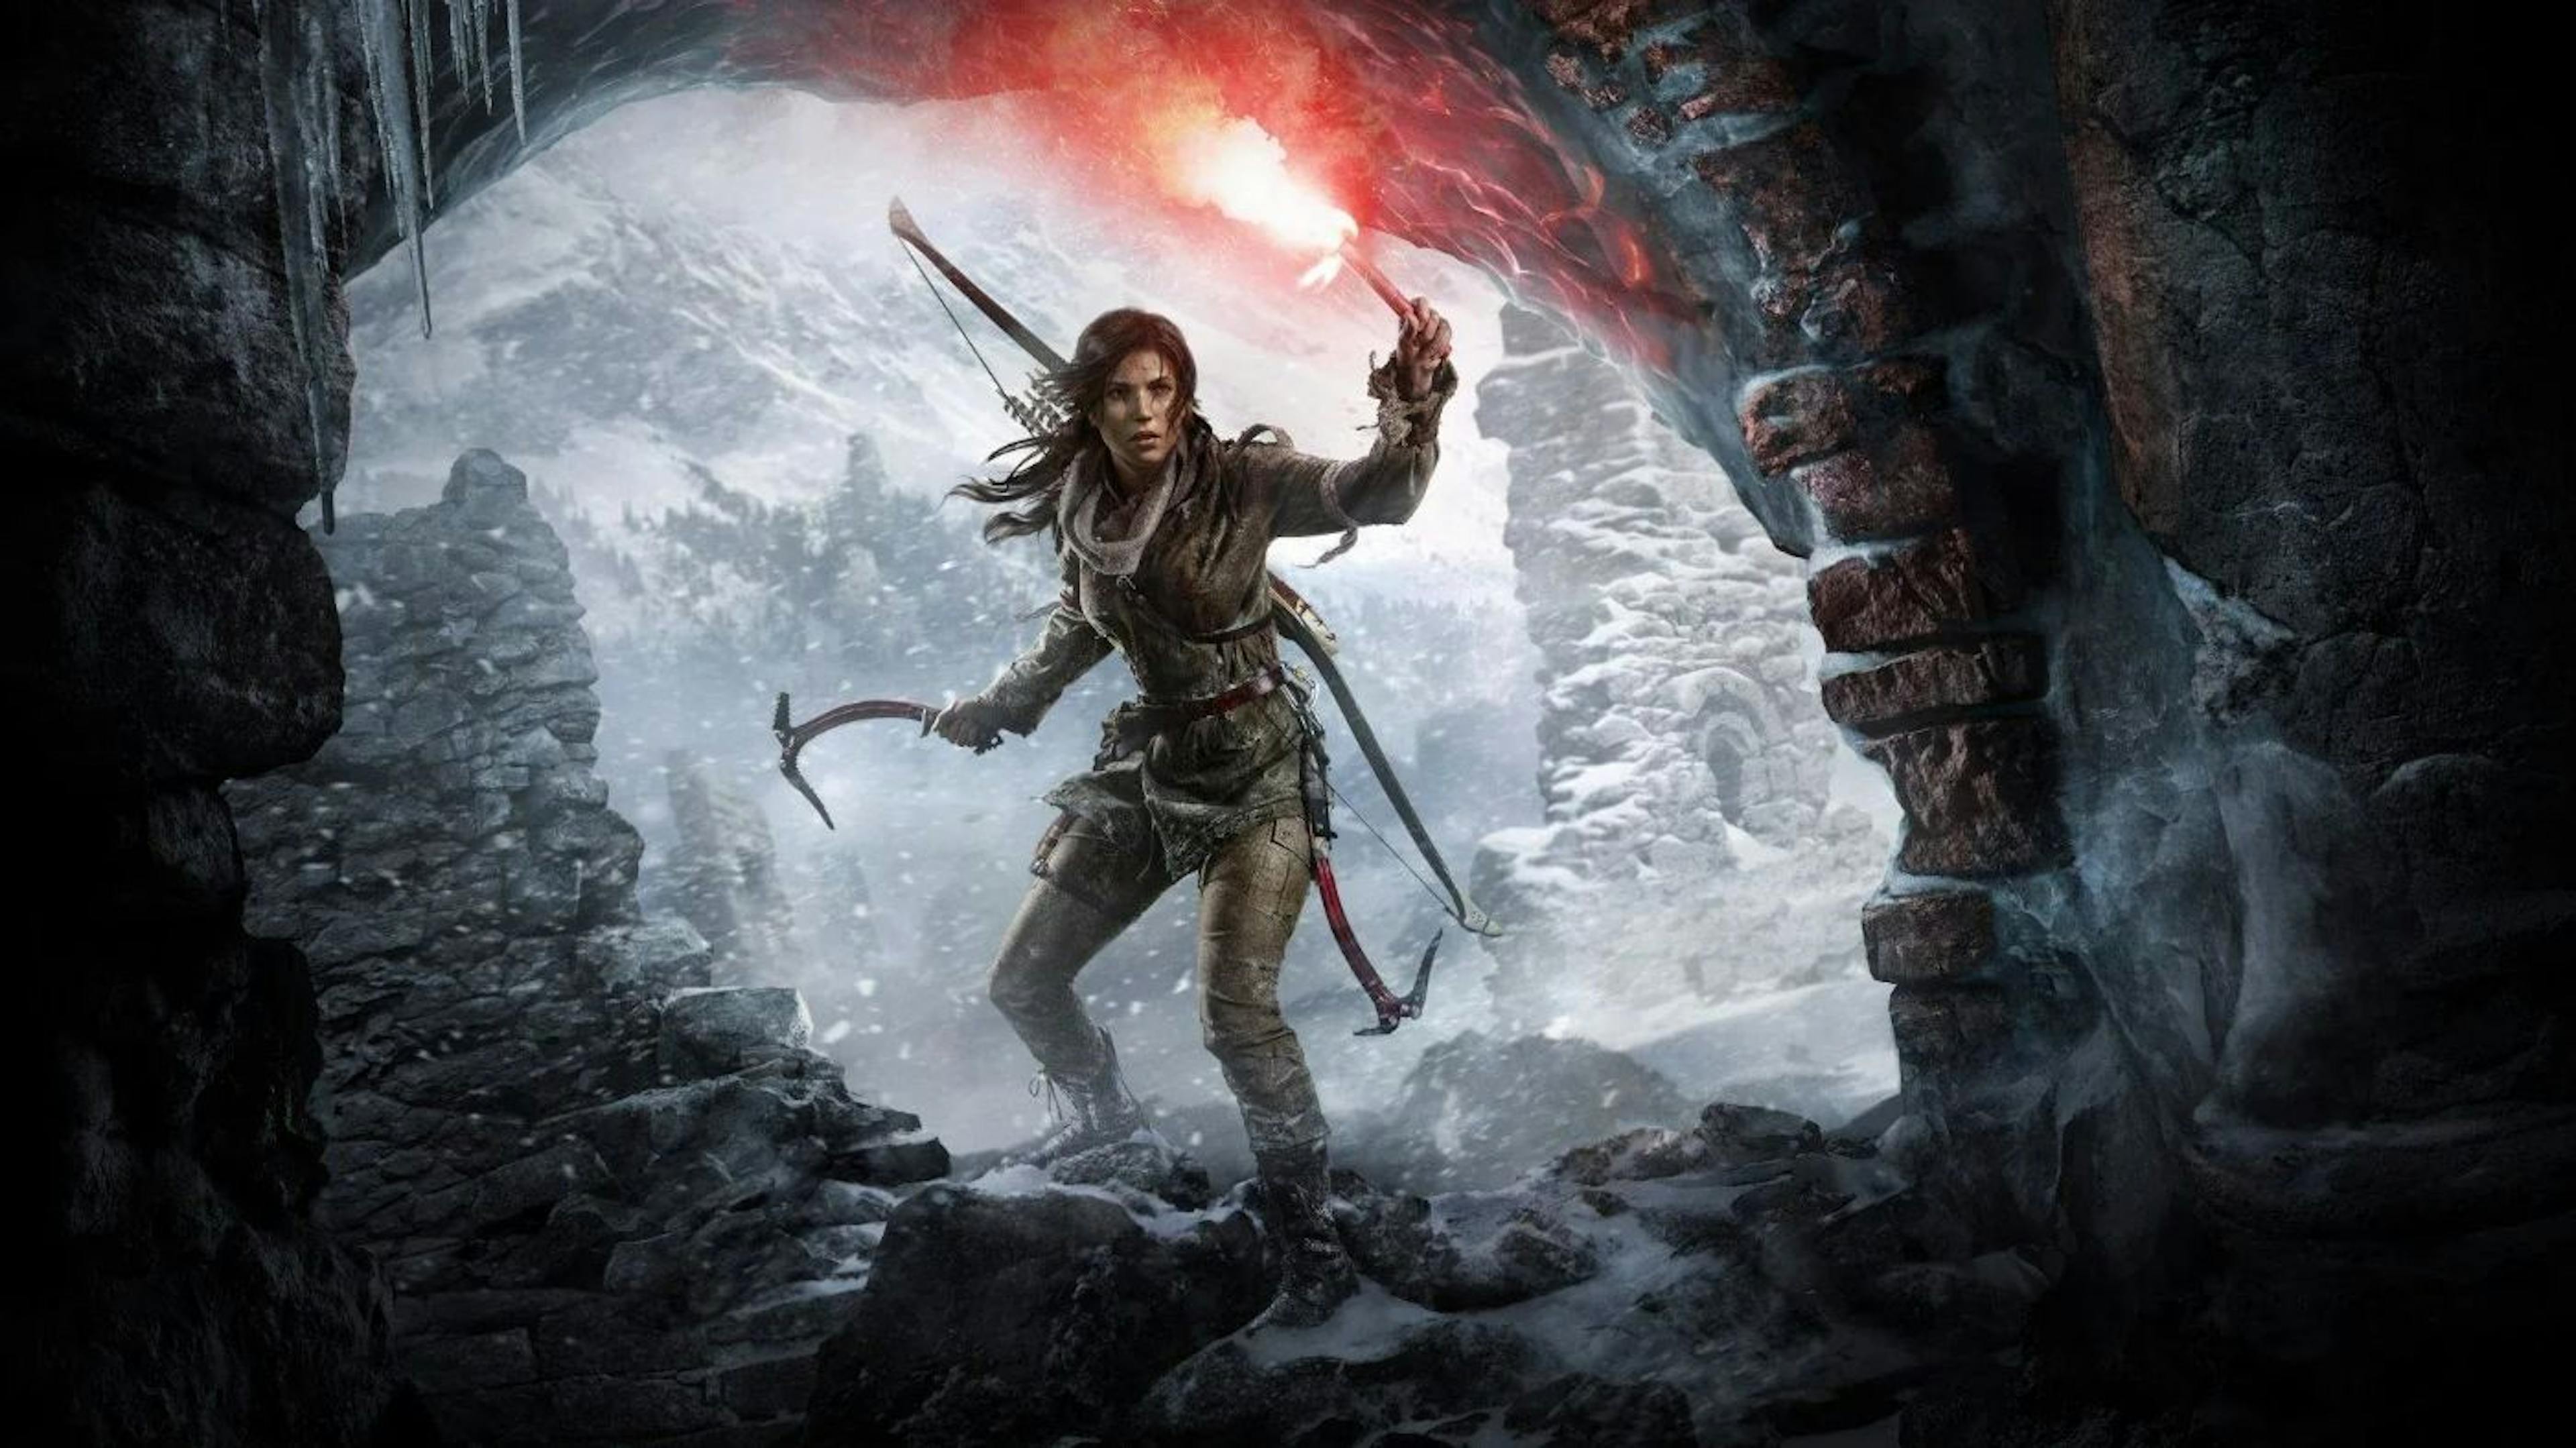 https://wallpaperaccess.com/rise-of-the-tomb-raider